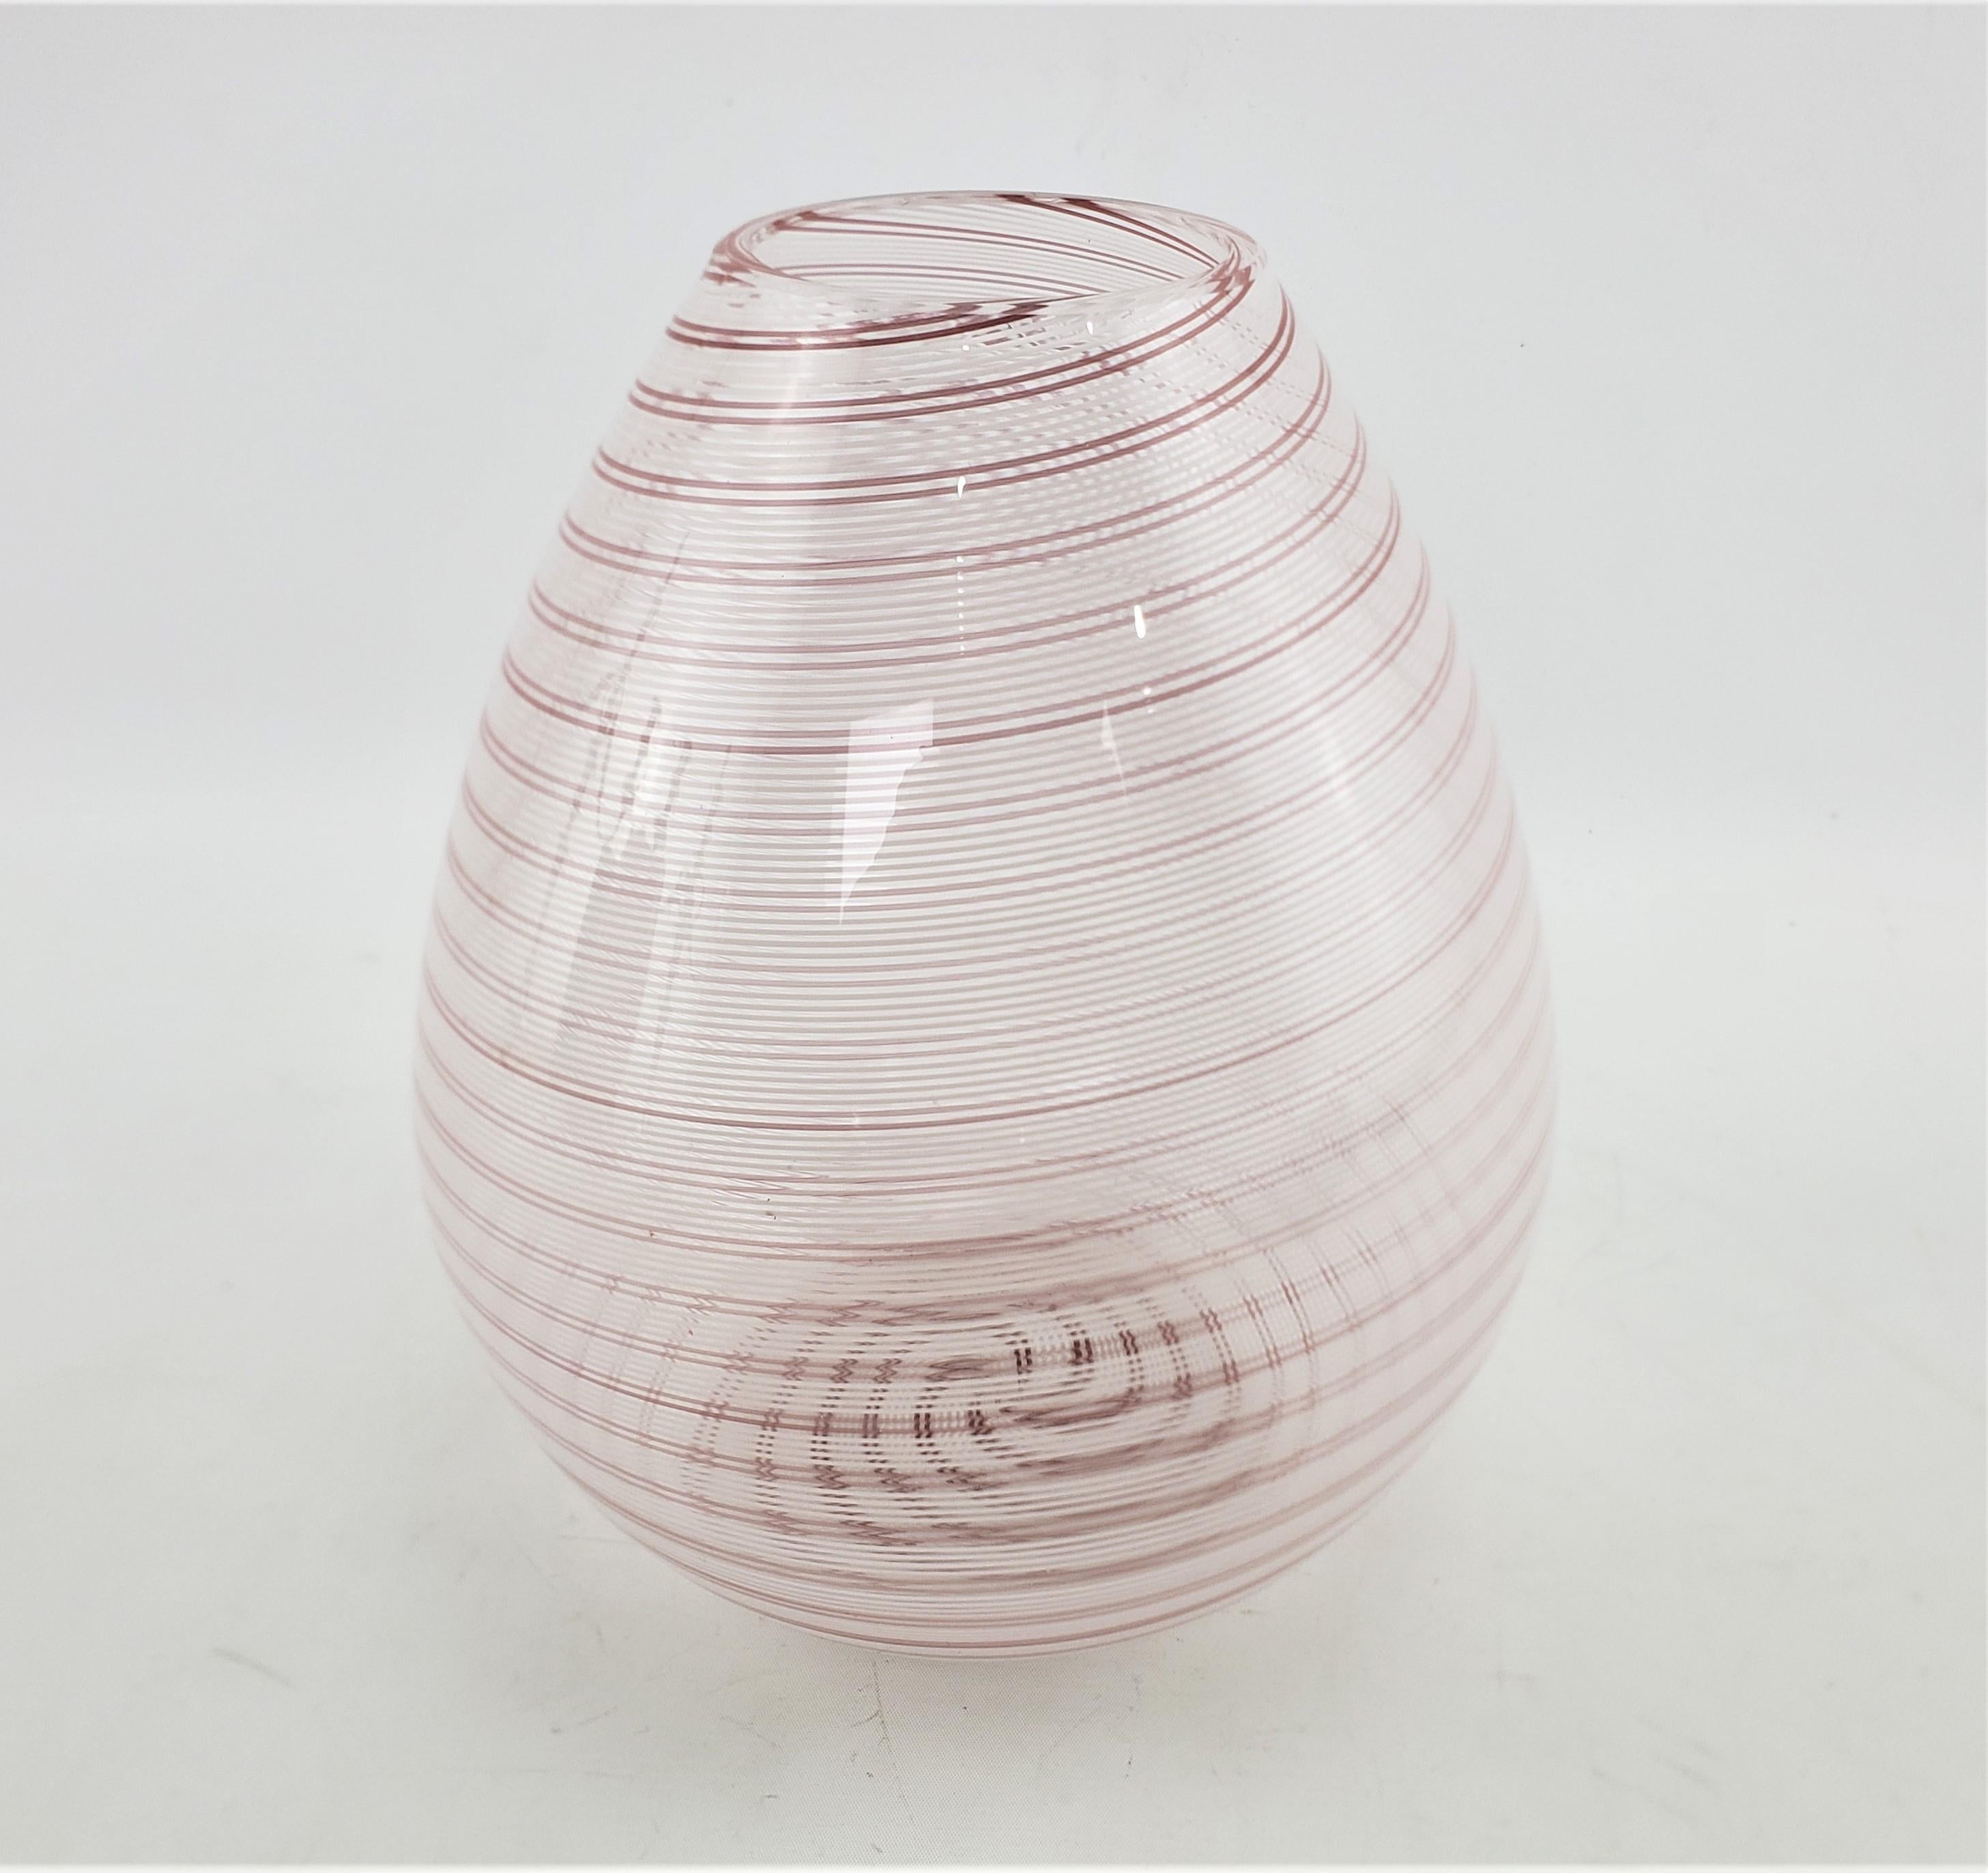 Italian Signed Barovier & Toso Mid-Century Murano Art Glass Candy Cane Ribbon Vase For Sale